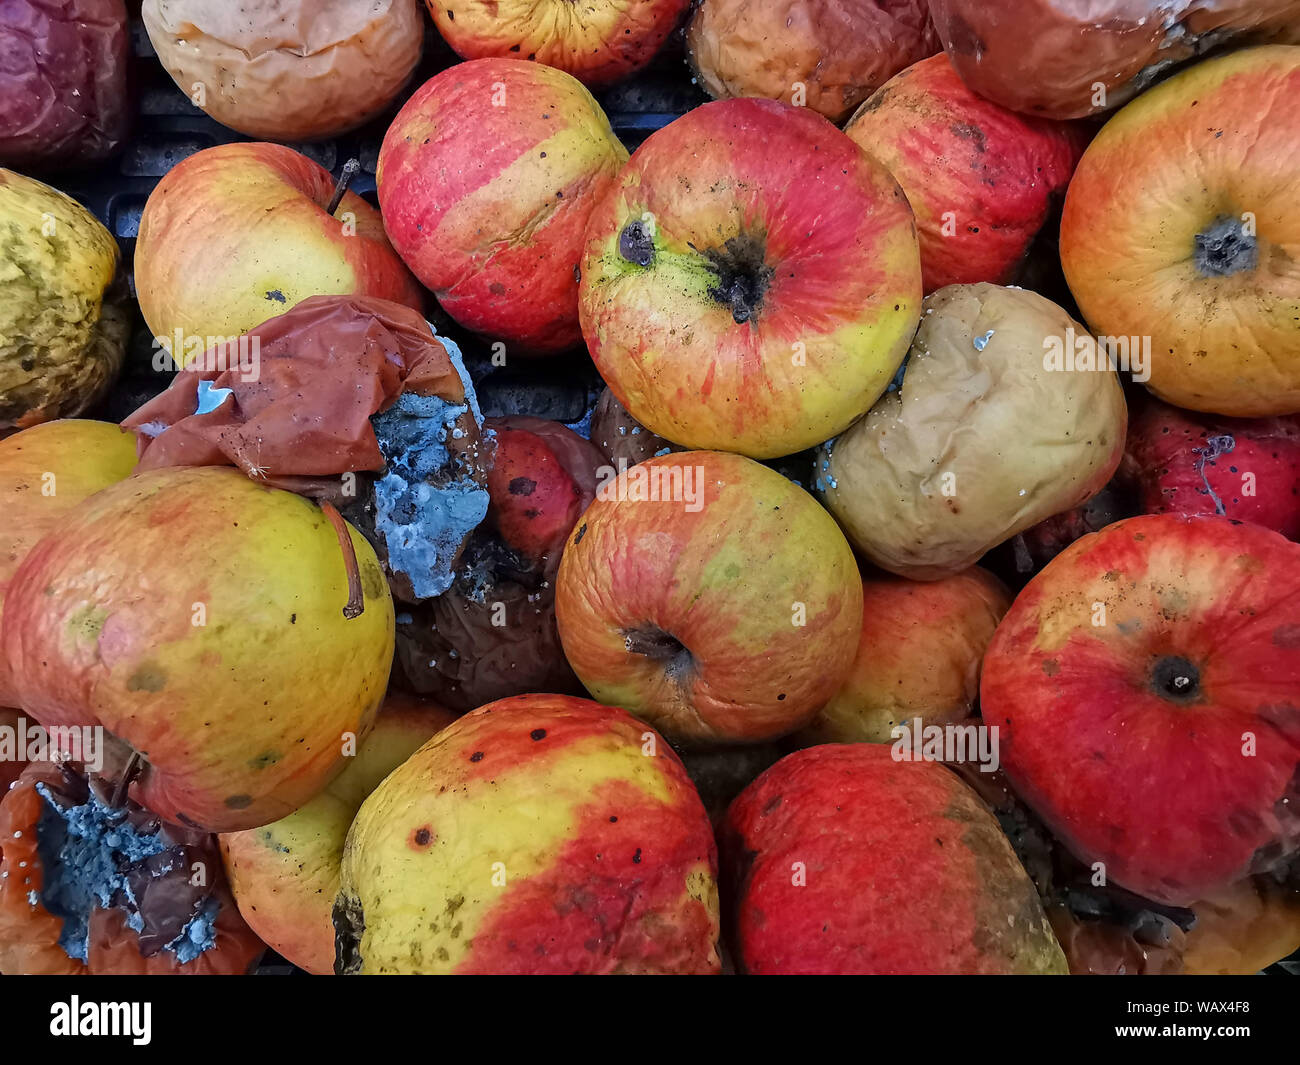 Sick and rotten apple as background. Dehydrated skin and bad apples Stock Photo